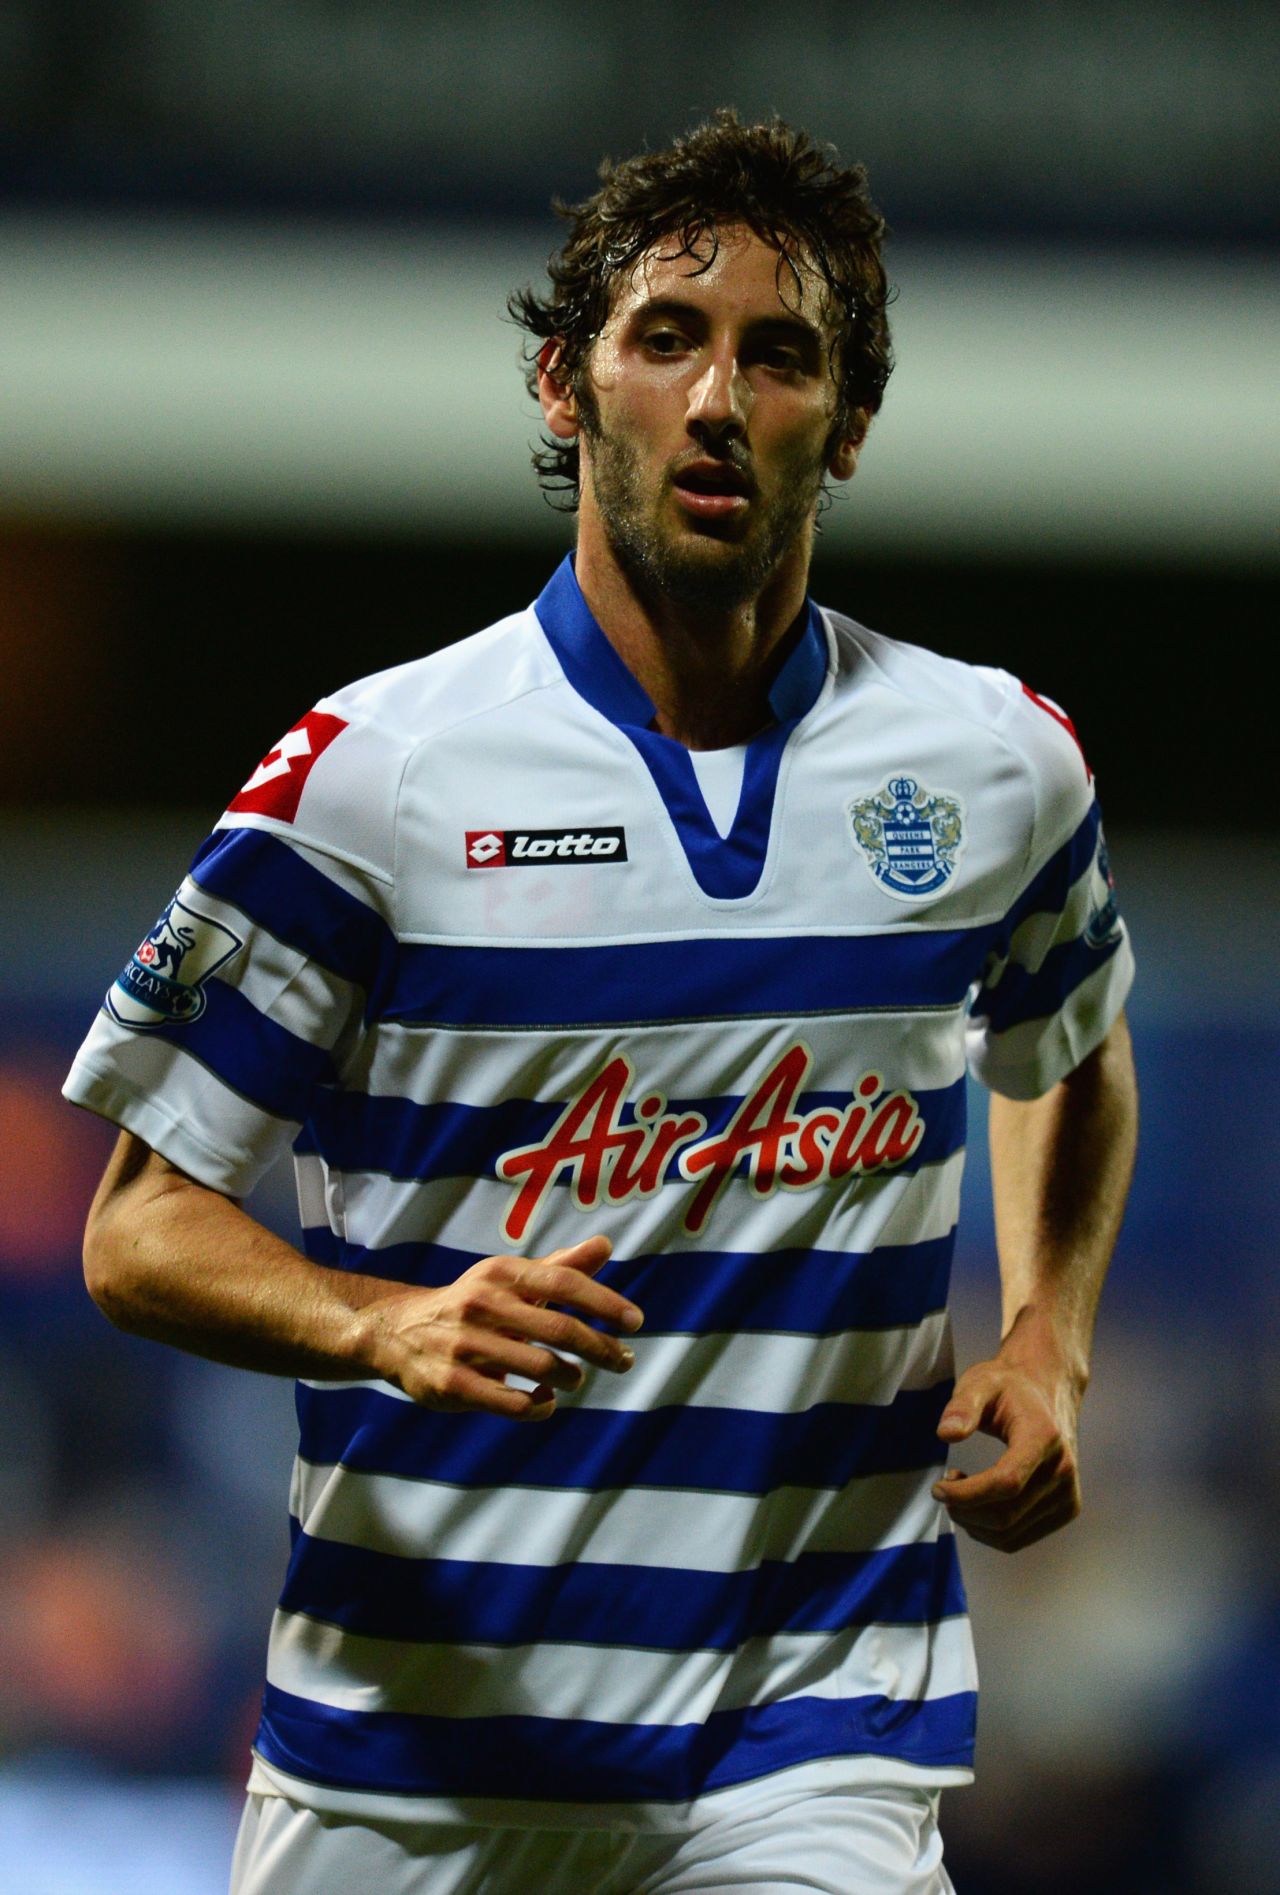 Esteban Granero arrived at Queens Park Rangers with the hope of lighting up the Premier League. But the former Real Madrid man has endured a difficult start, with his new team rock bottom and yet to win a game.